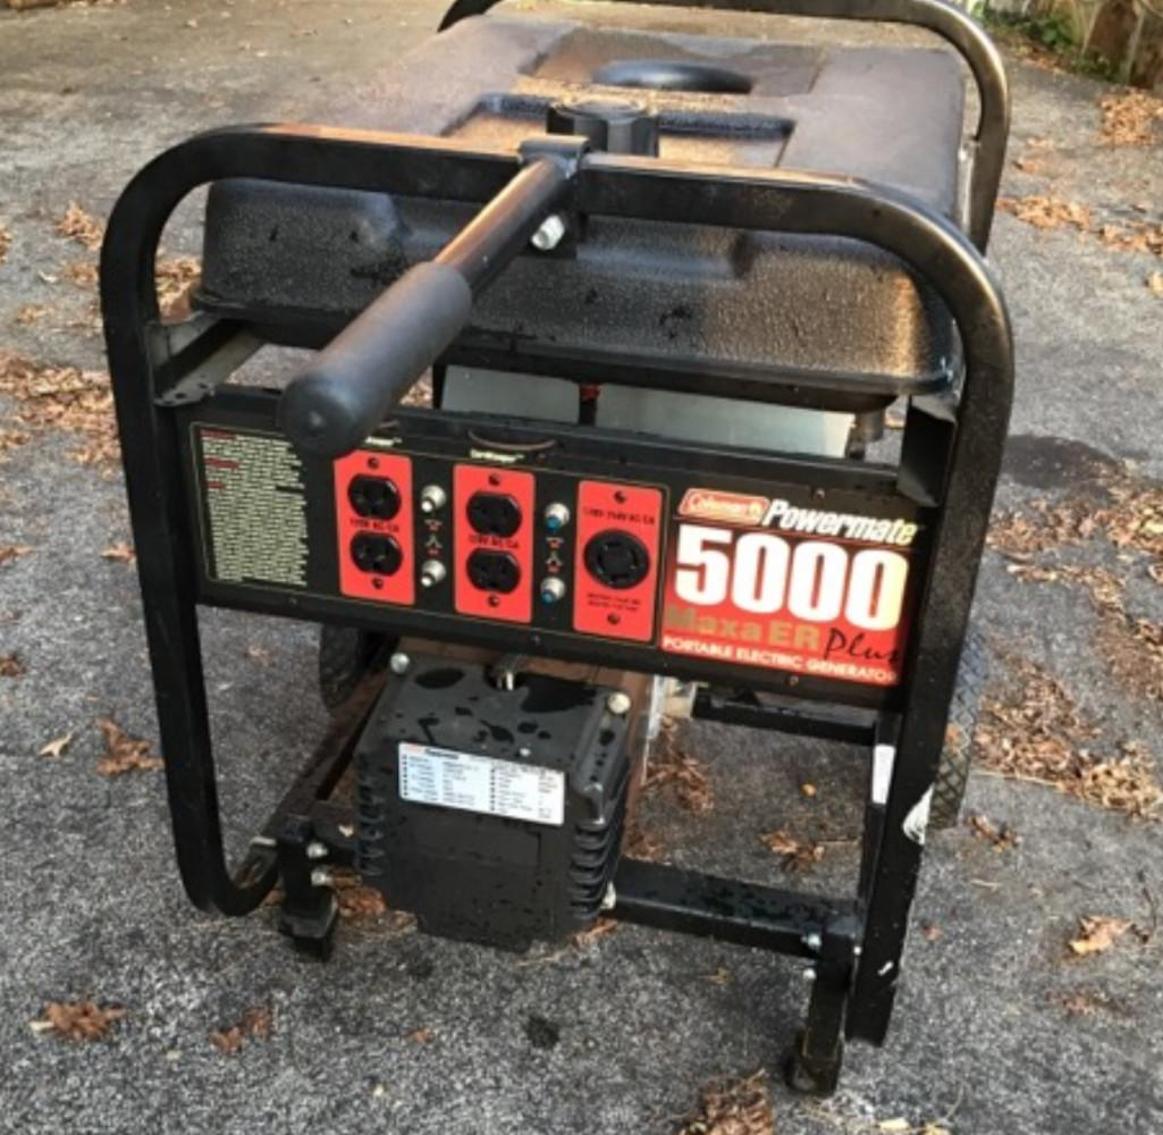 Image for Coleman Power Mate 5000 Generator